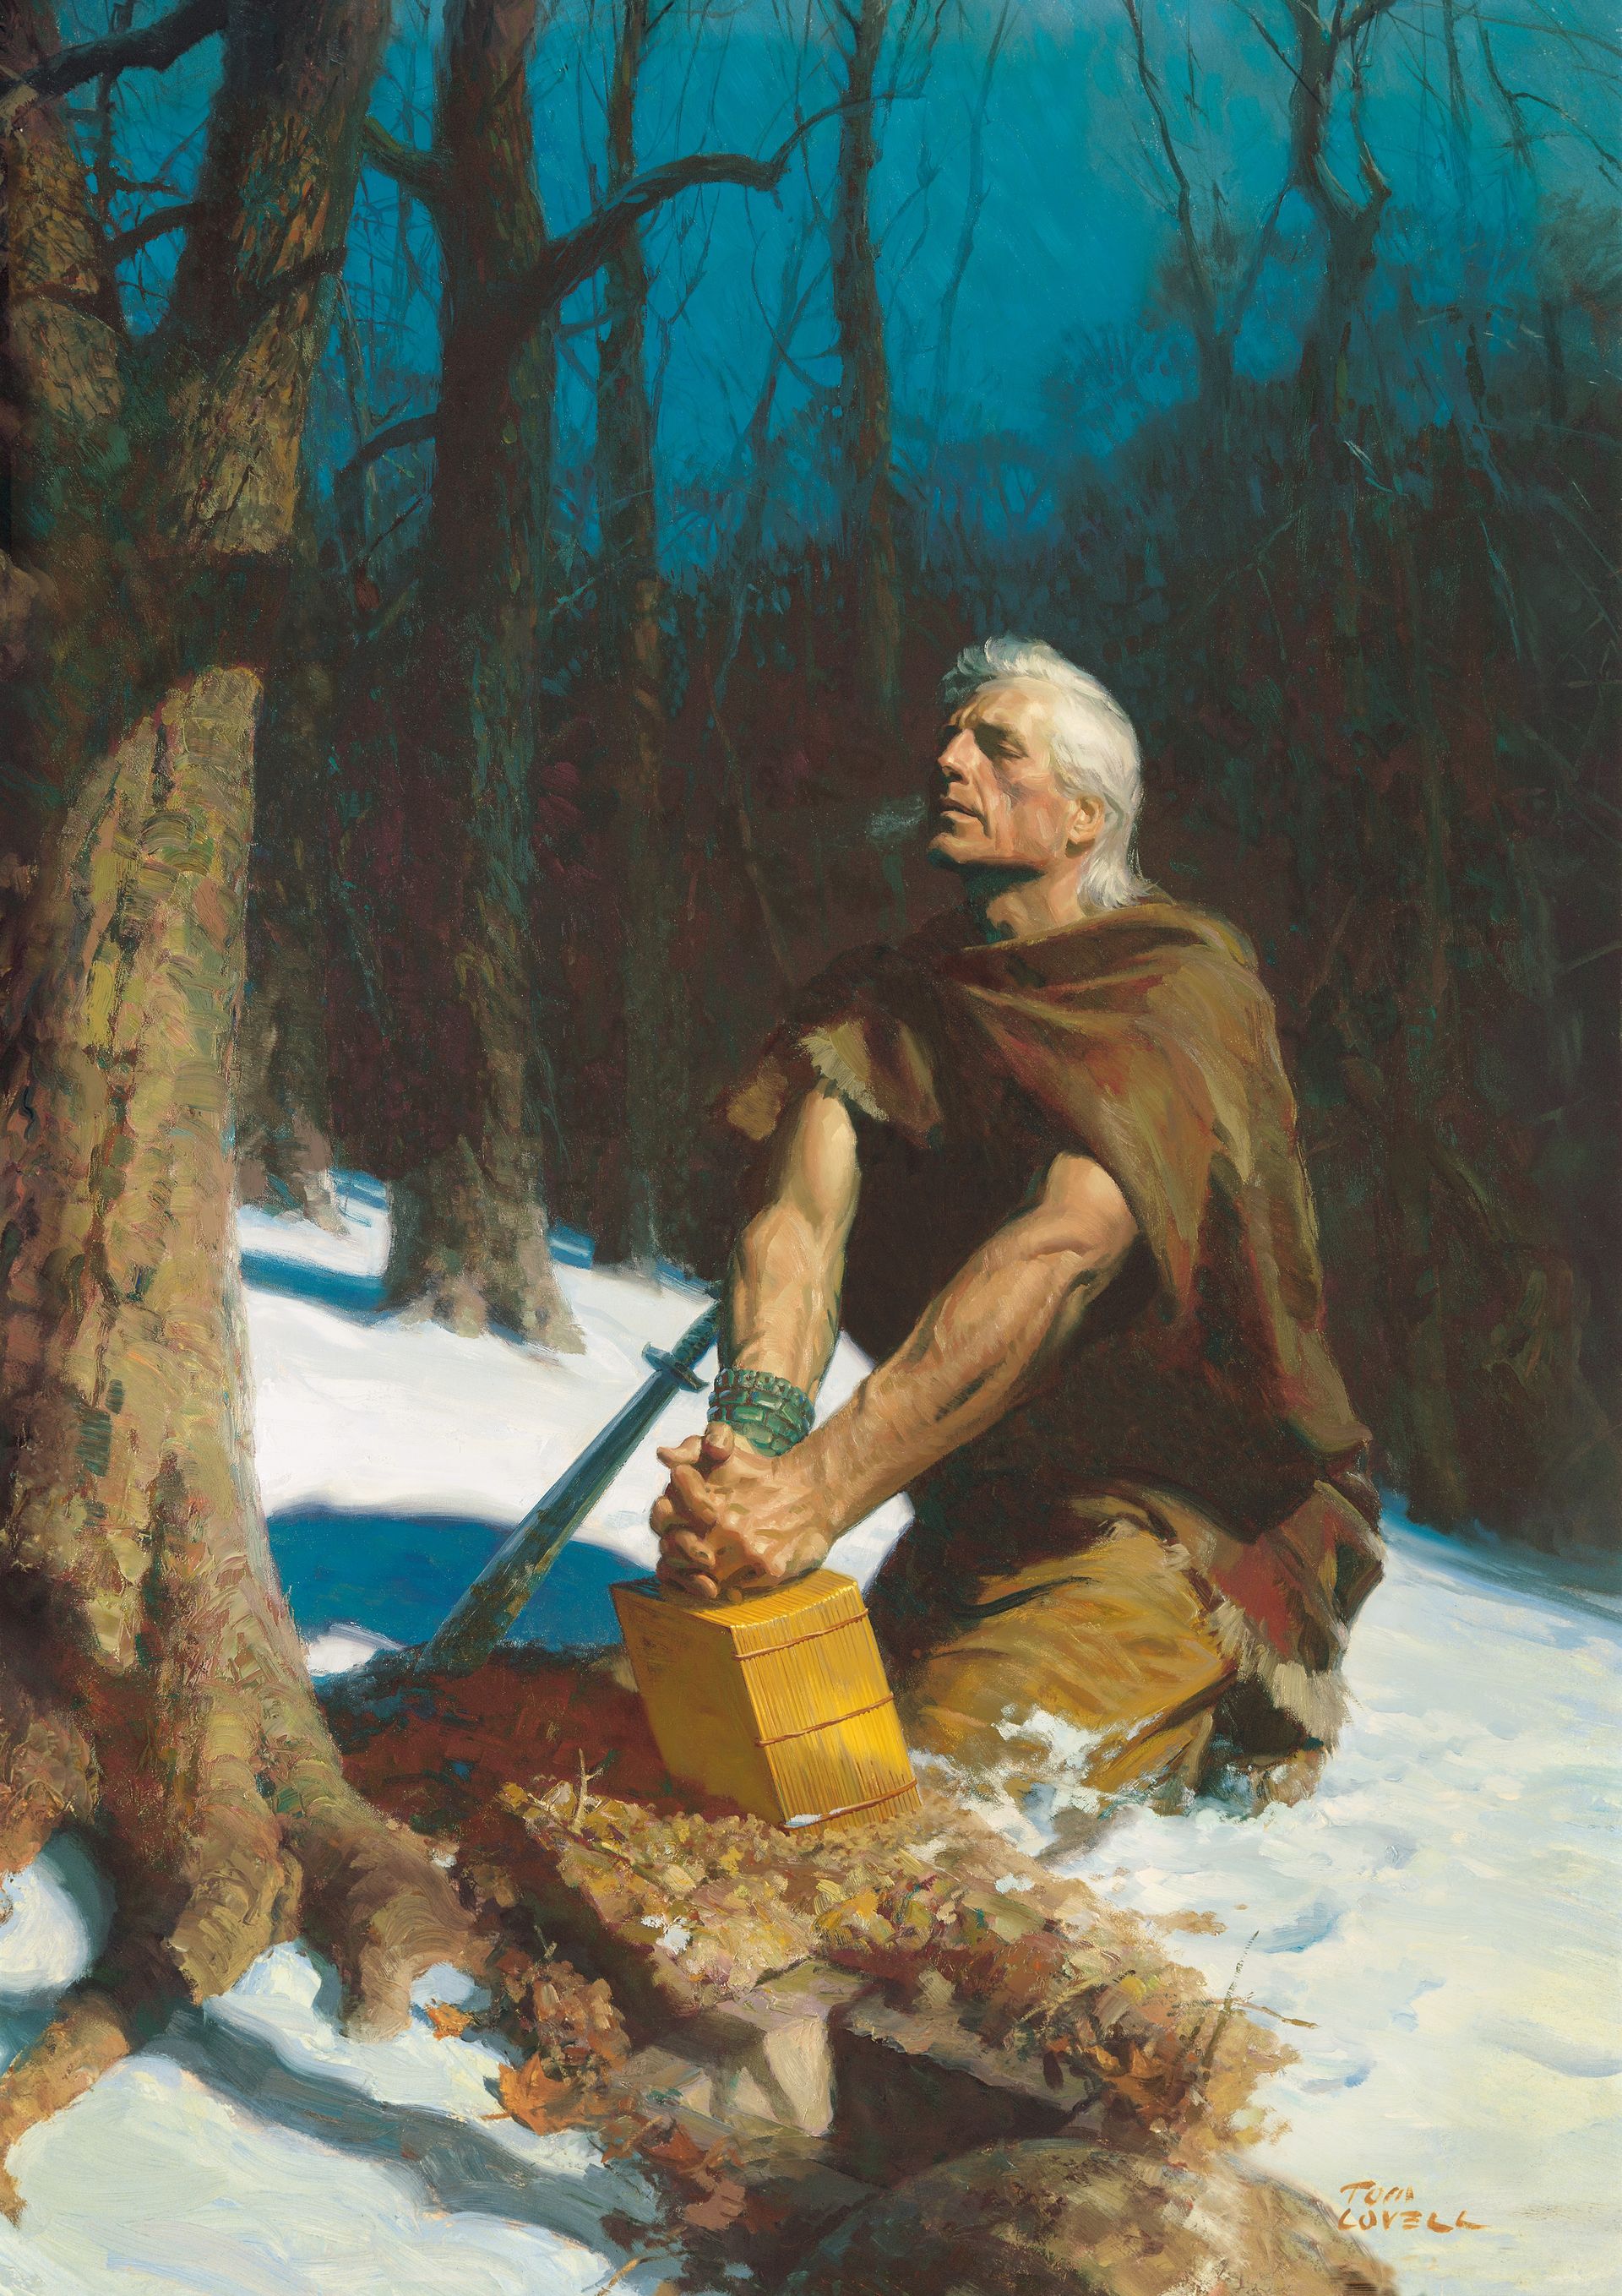 Moroni Hides the Plates in the Hill Cumorah (Moroni Burying the Plates), by Tom Lovell (62462); GAK 320; GAB 86; Primary manual 3-35; Primary manual 4-02; Mormon 6:6; 8:1, 3–4; Moroni 10:1–5